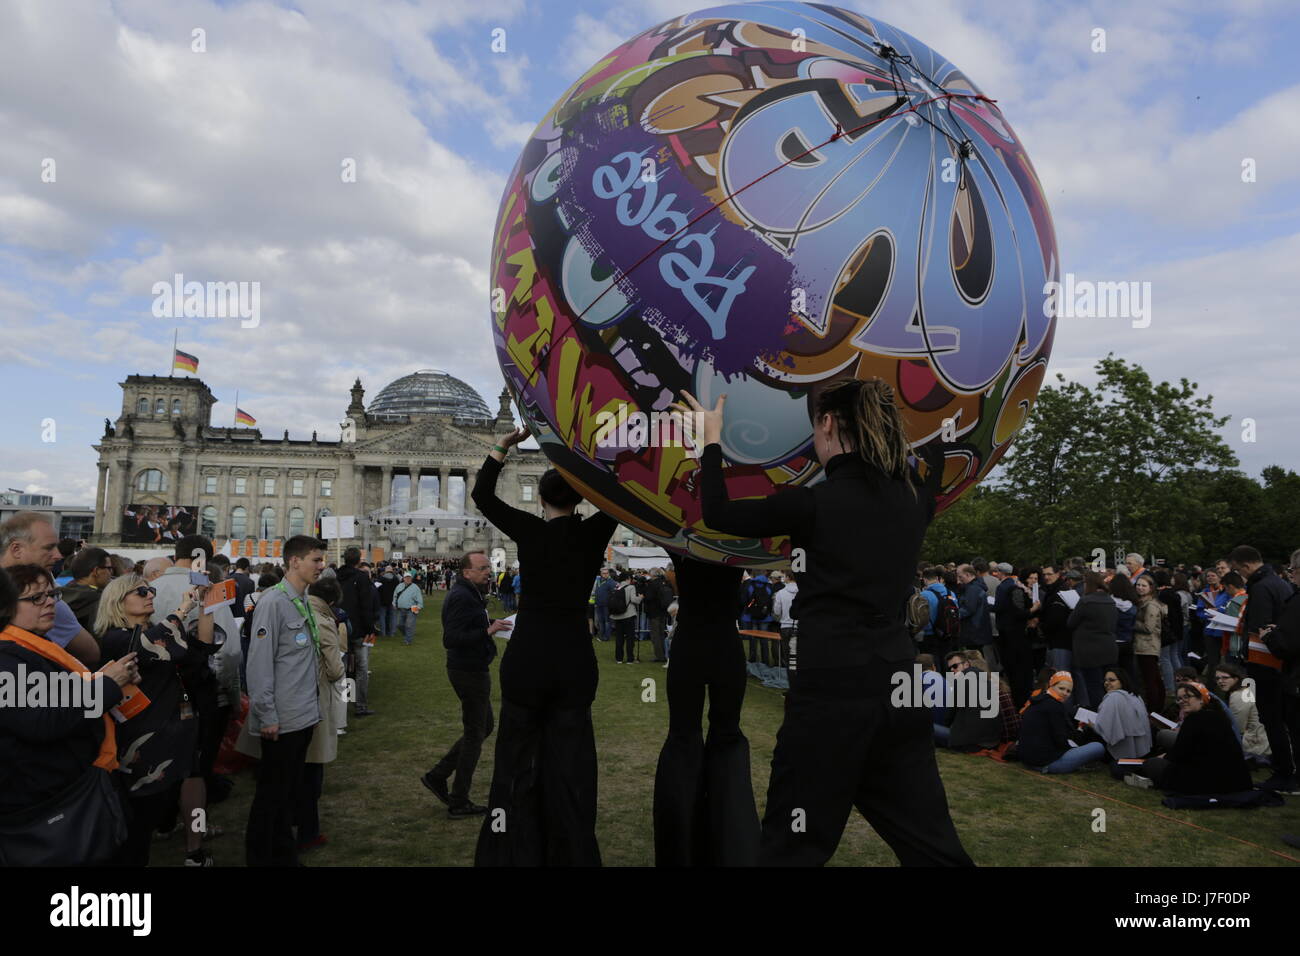 A large ball, created by artists' is carried through the congregation during the opening service. Tens of thousands of people attended the opening services of the 36th German Protestant Church Congress (Evangelischer Kirchentag). The Congress is held from 24. to 28. May in Berlin and more than 100,000 visitors are expected to attend. The congress coincides with the 500. anniversary of the Reformation. Photo: Cronos/Michael Debets Stock Photo